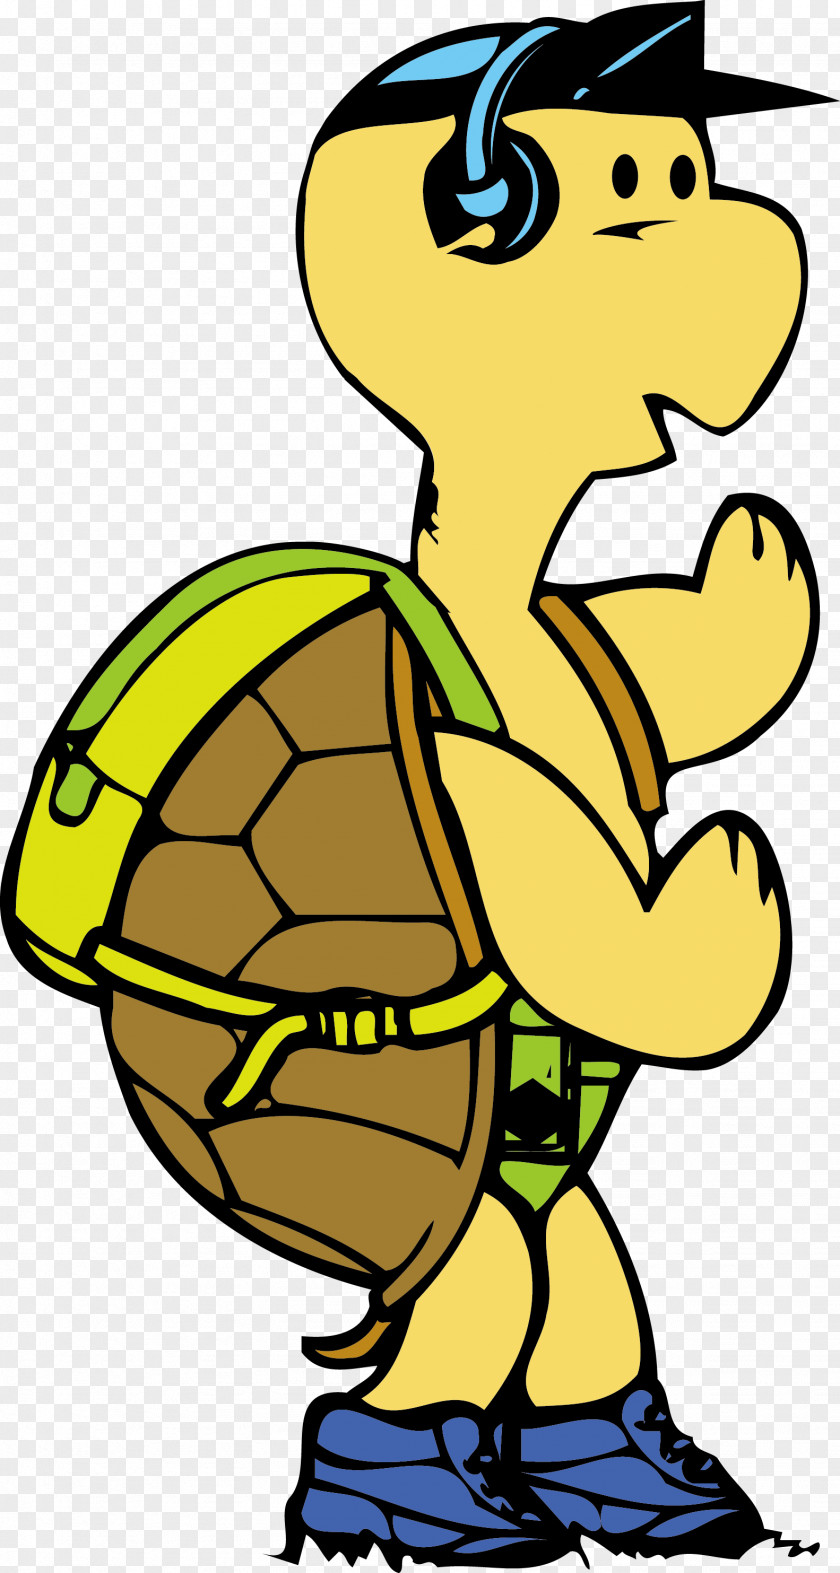 Turtle McDull Cartoon Illustration PNG Illustration, to listen the music of turtle material clipart PNG